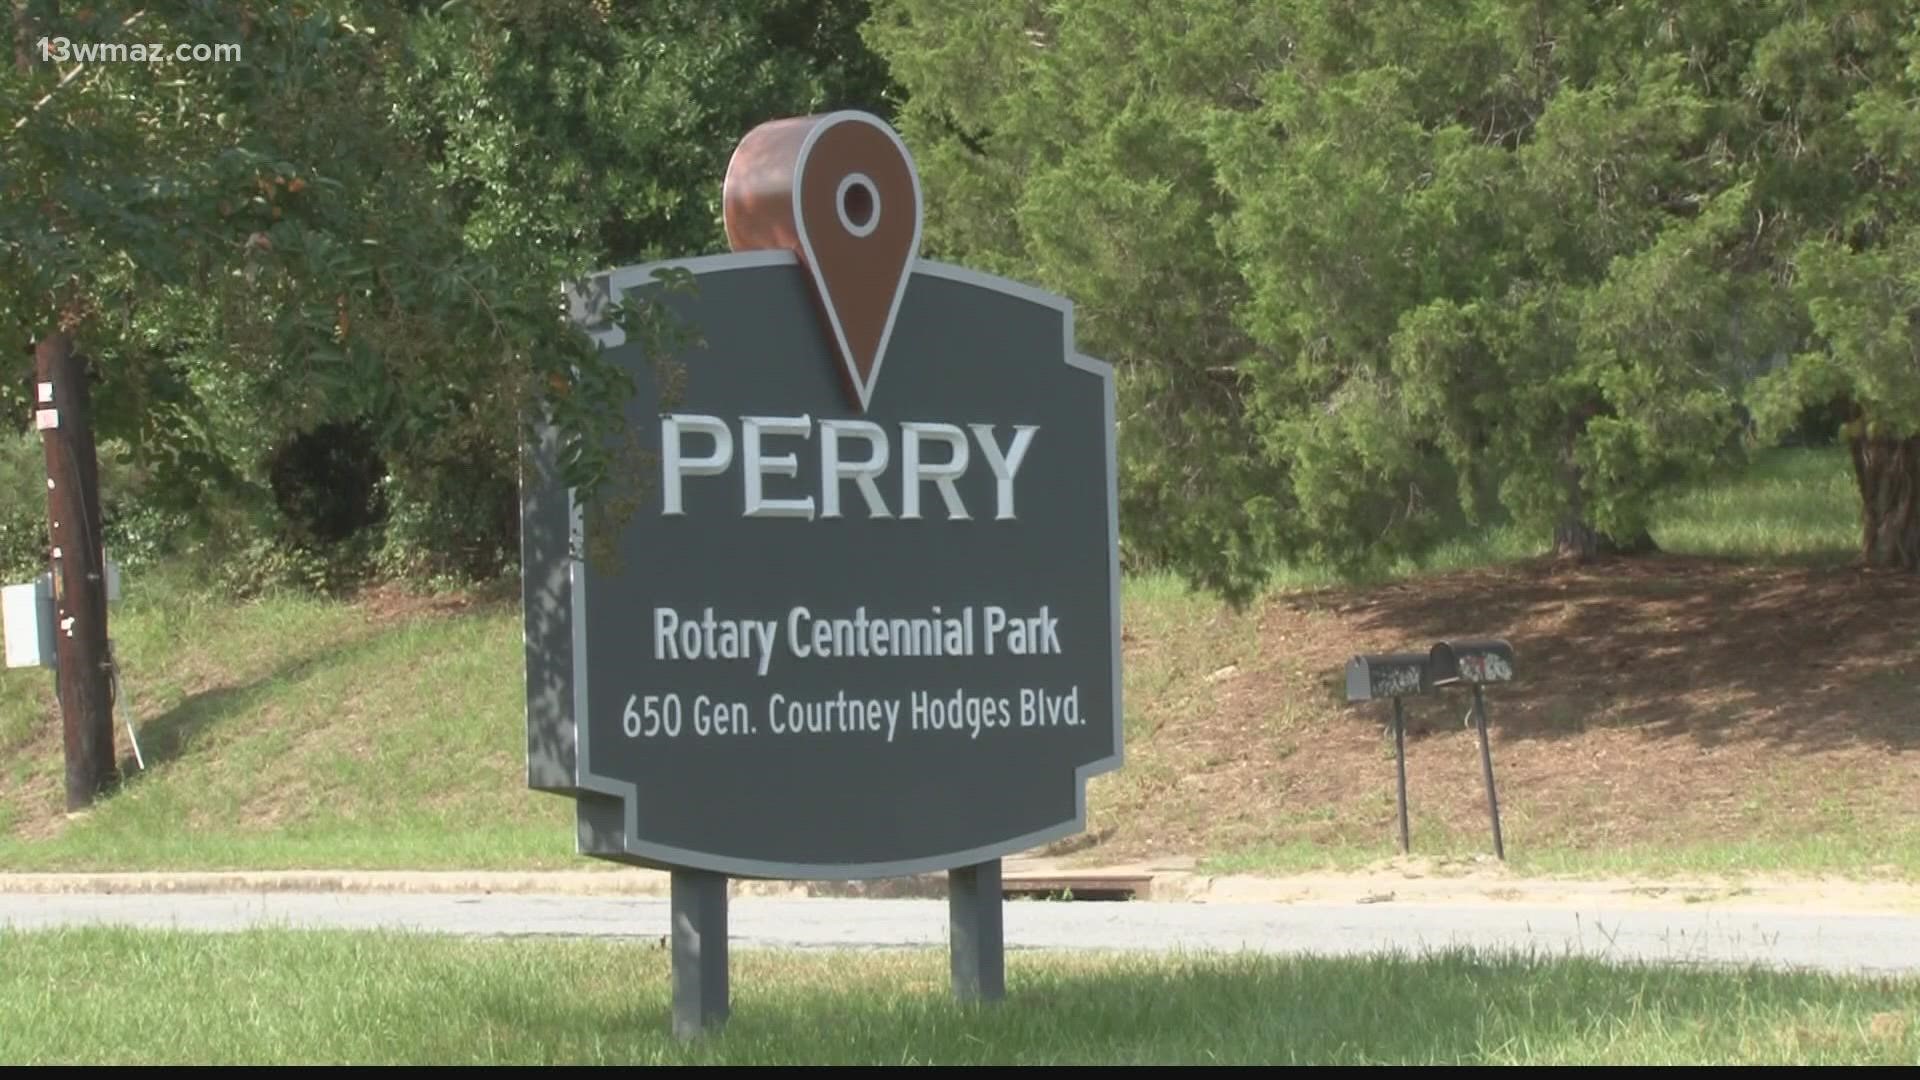 Perry's population rose nearly 50% in the past decade -- that's more than 6,700 new residents.